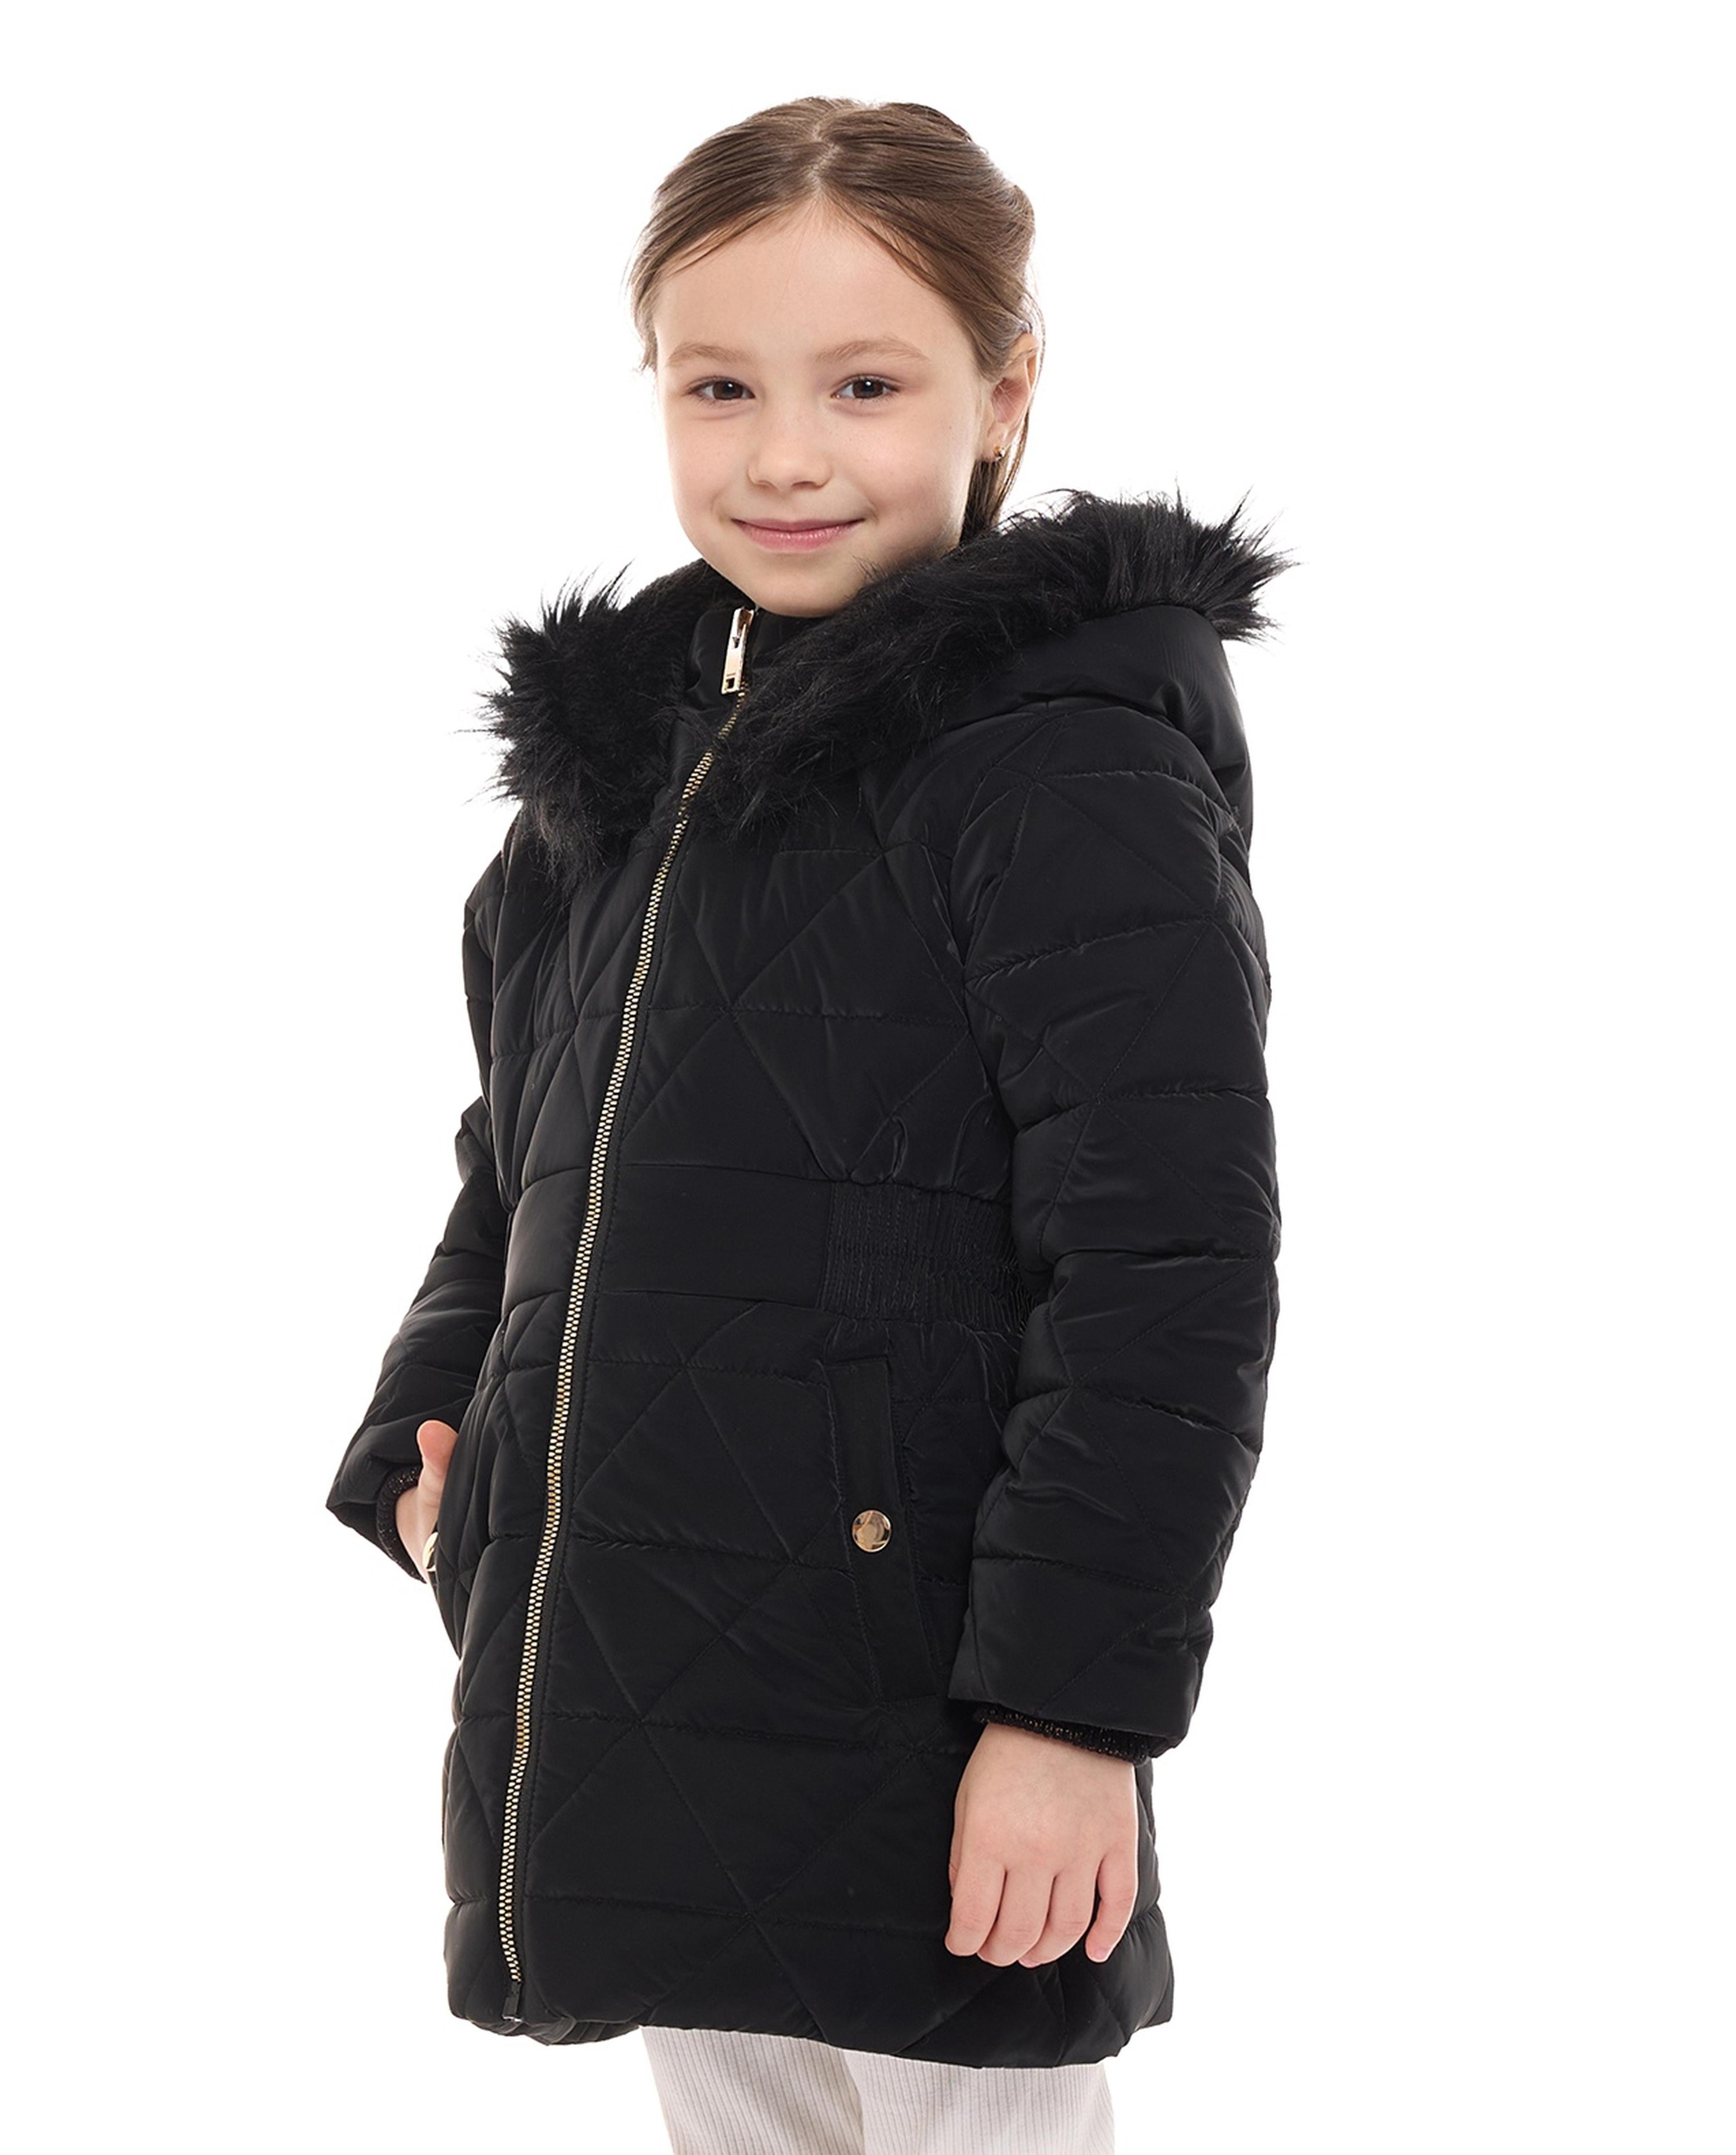 Furry Hooded Quilted Jacket with Zipper Closure